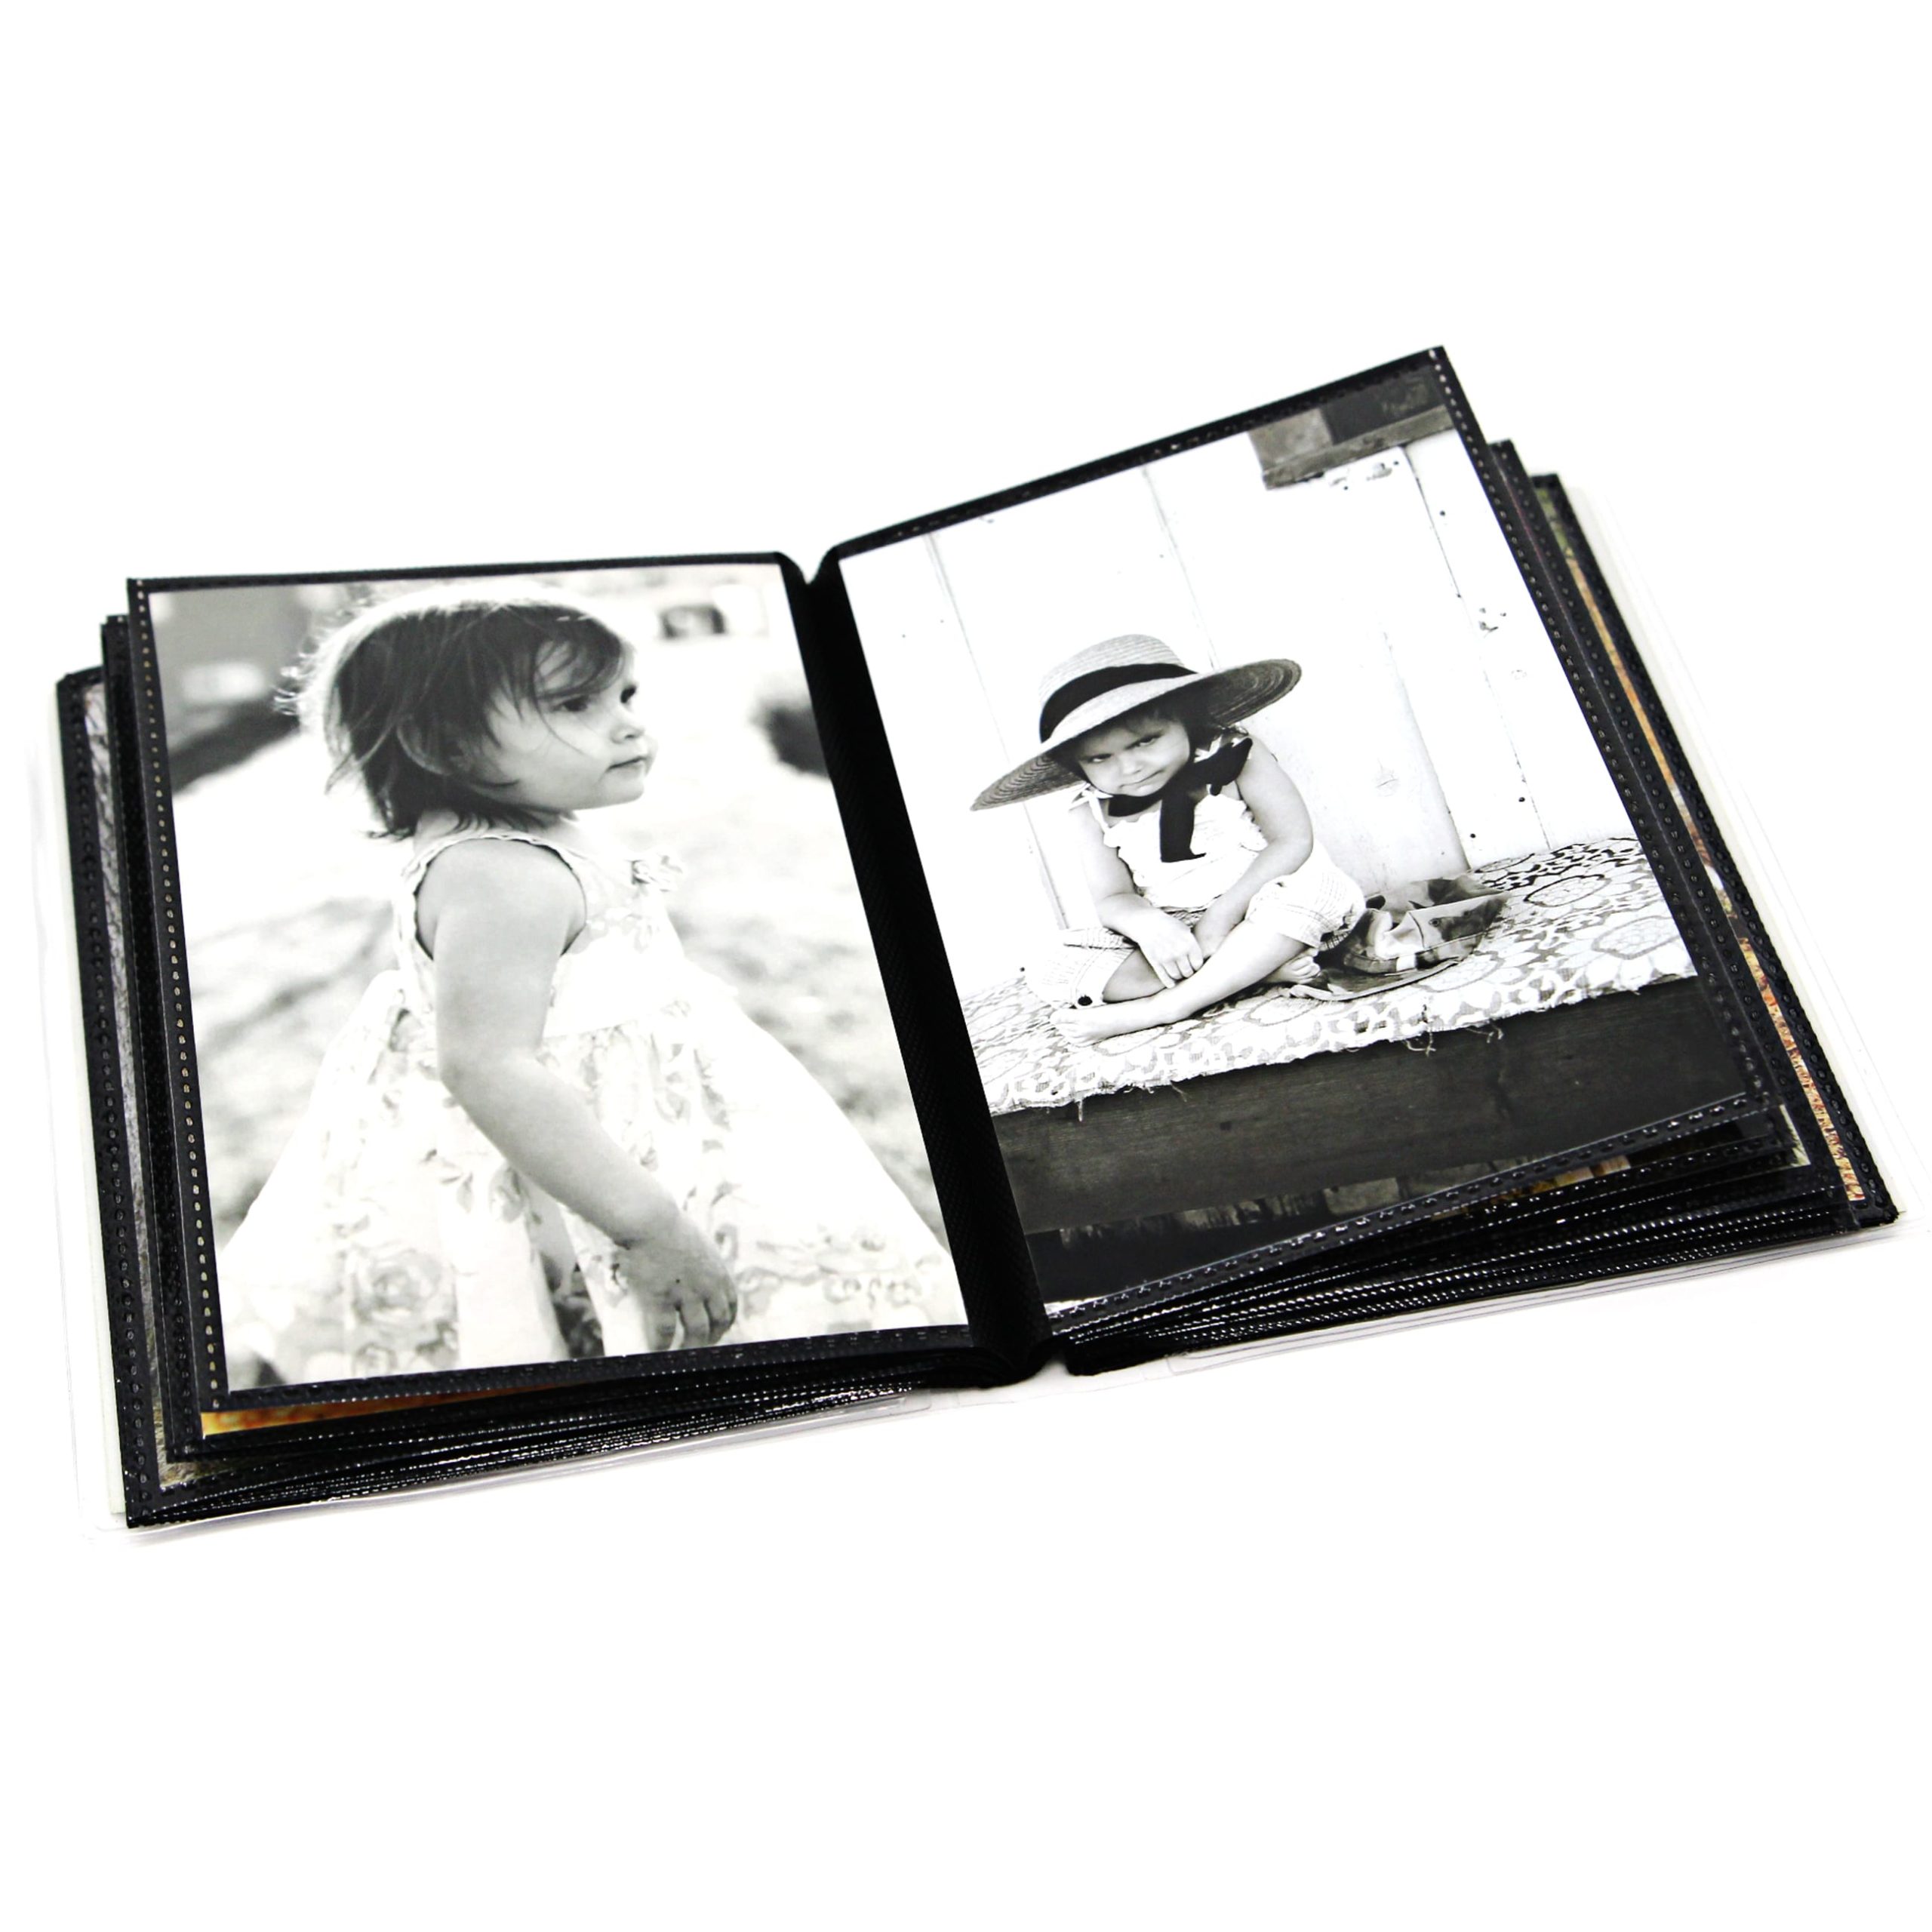 5 x 7 Photo Albums Pack of 3 with Black Pockets, Each Photo Album